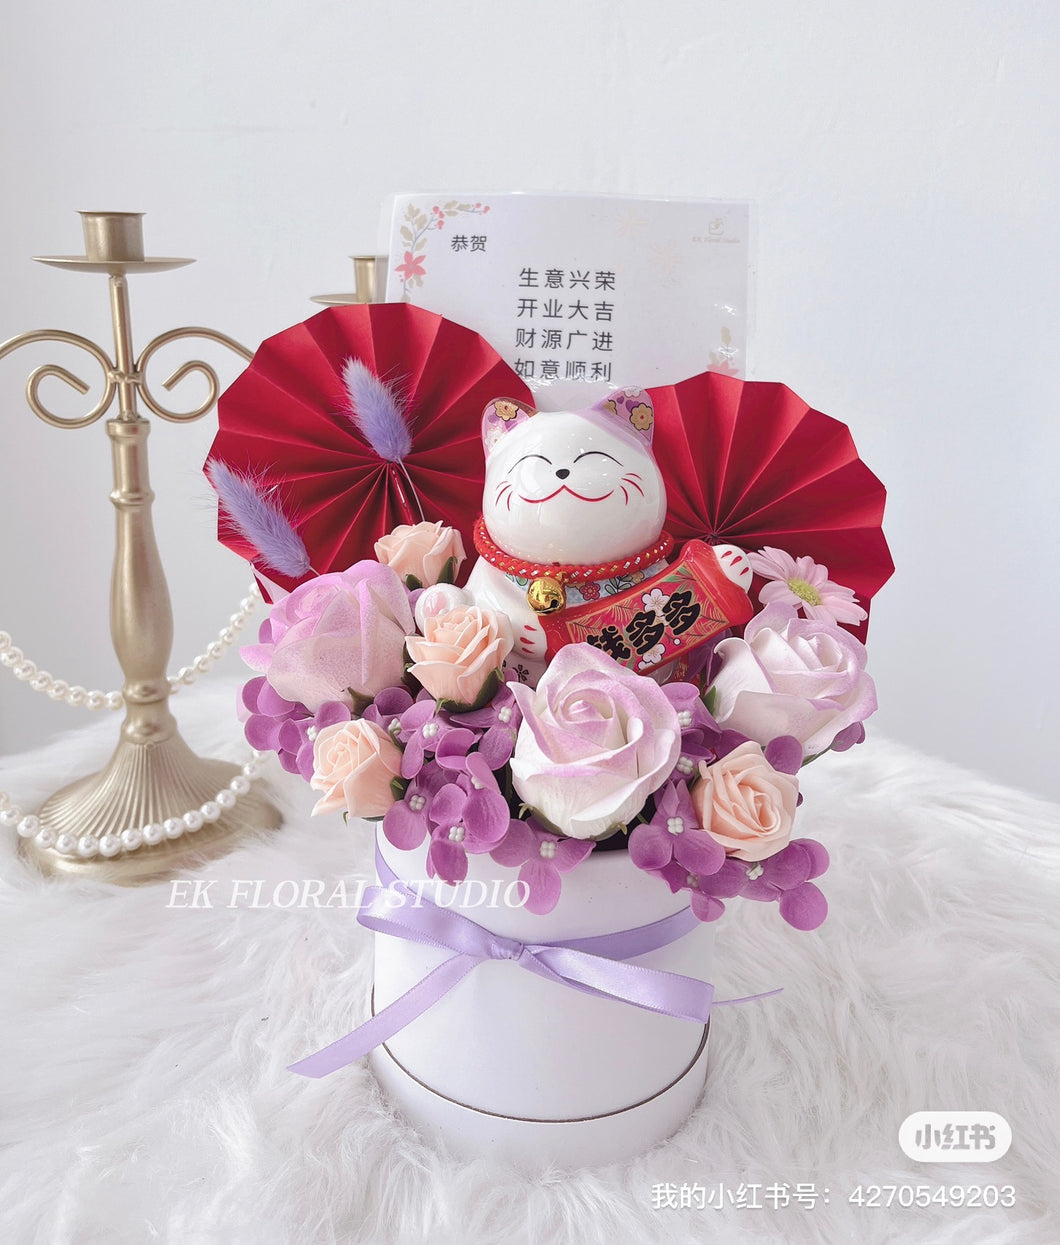 Thriving Soap Flower Bucket with Fortune Cat兴隆招财猫开业花桶